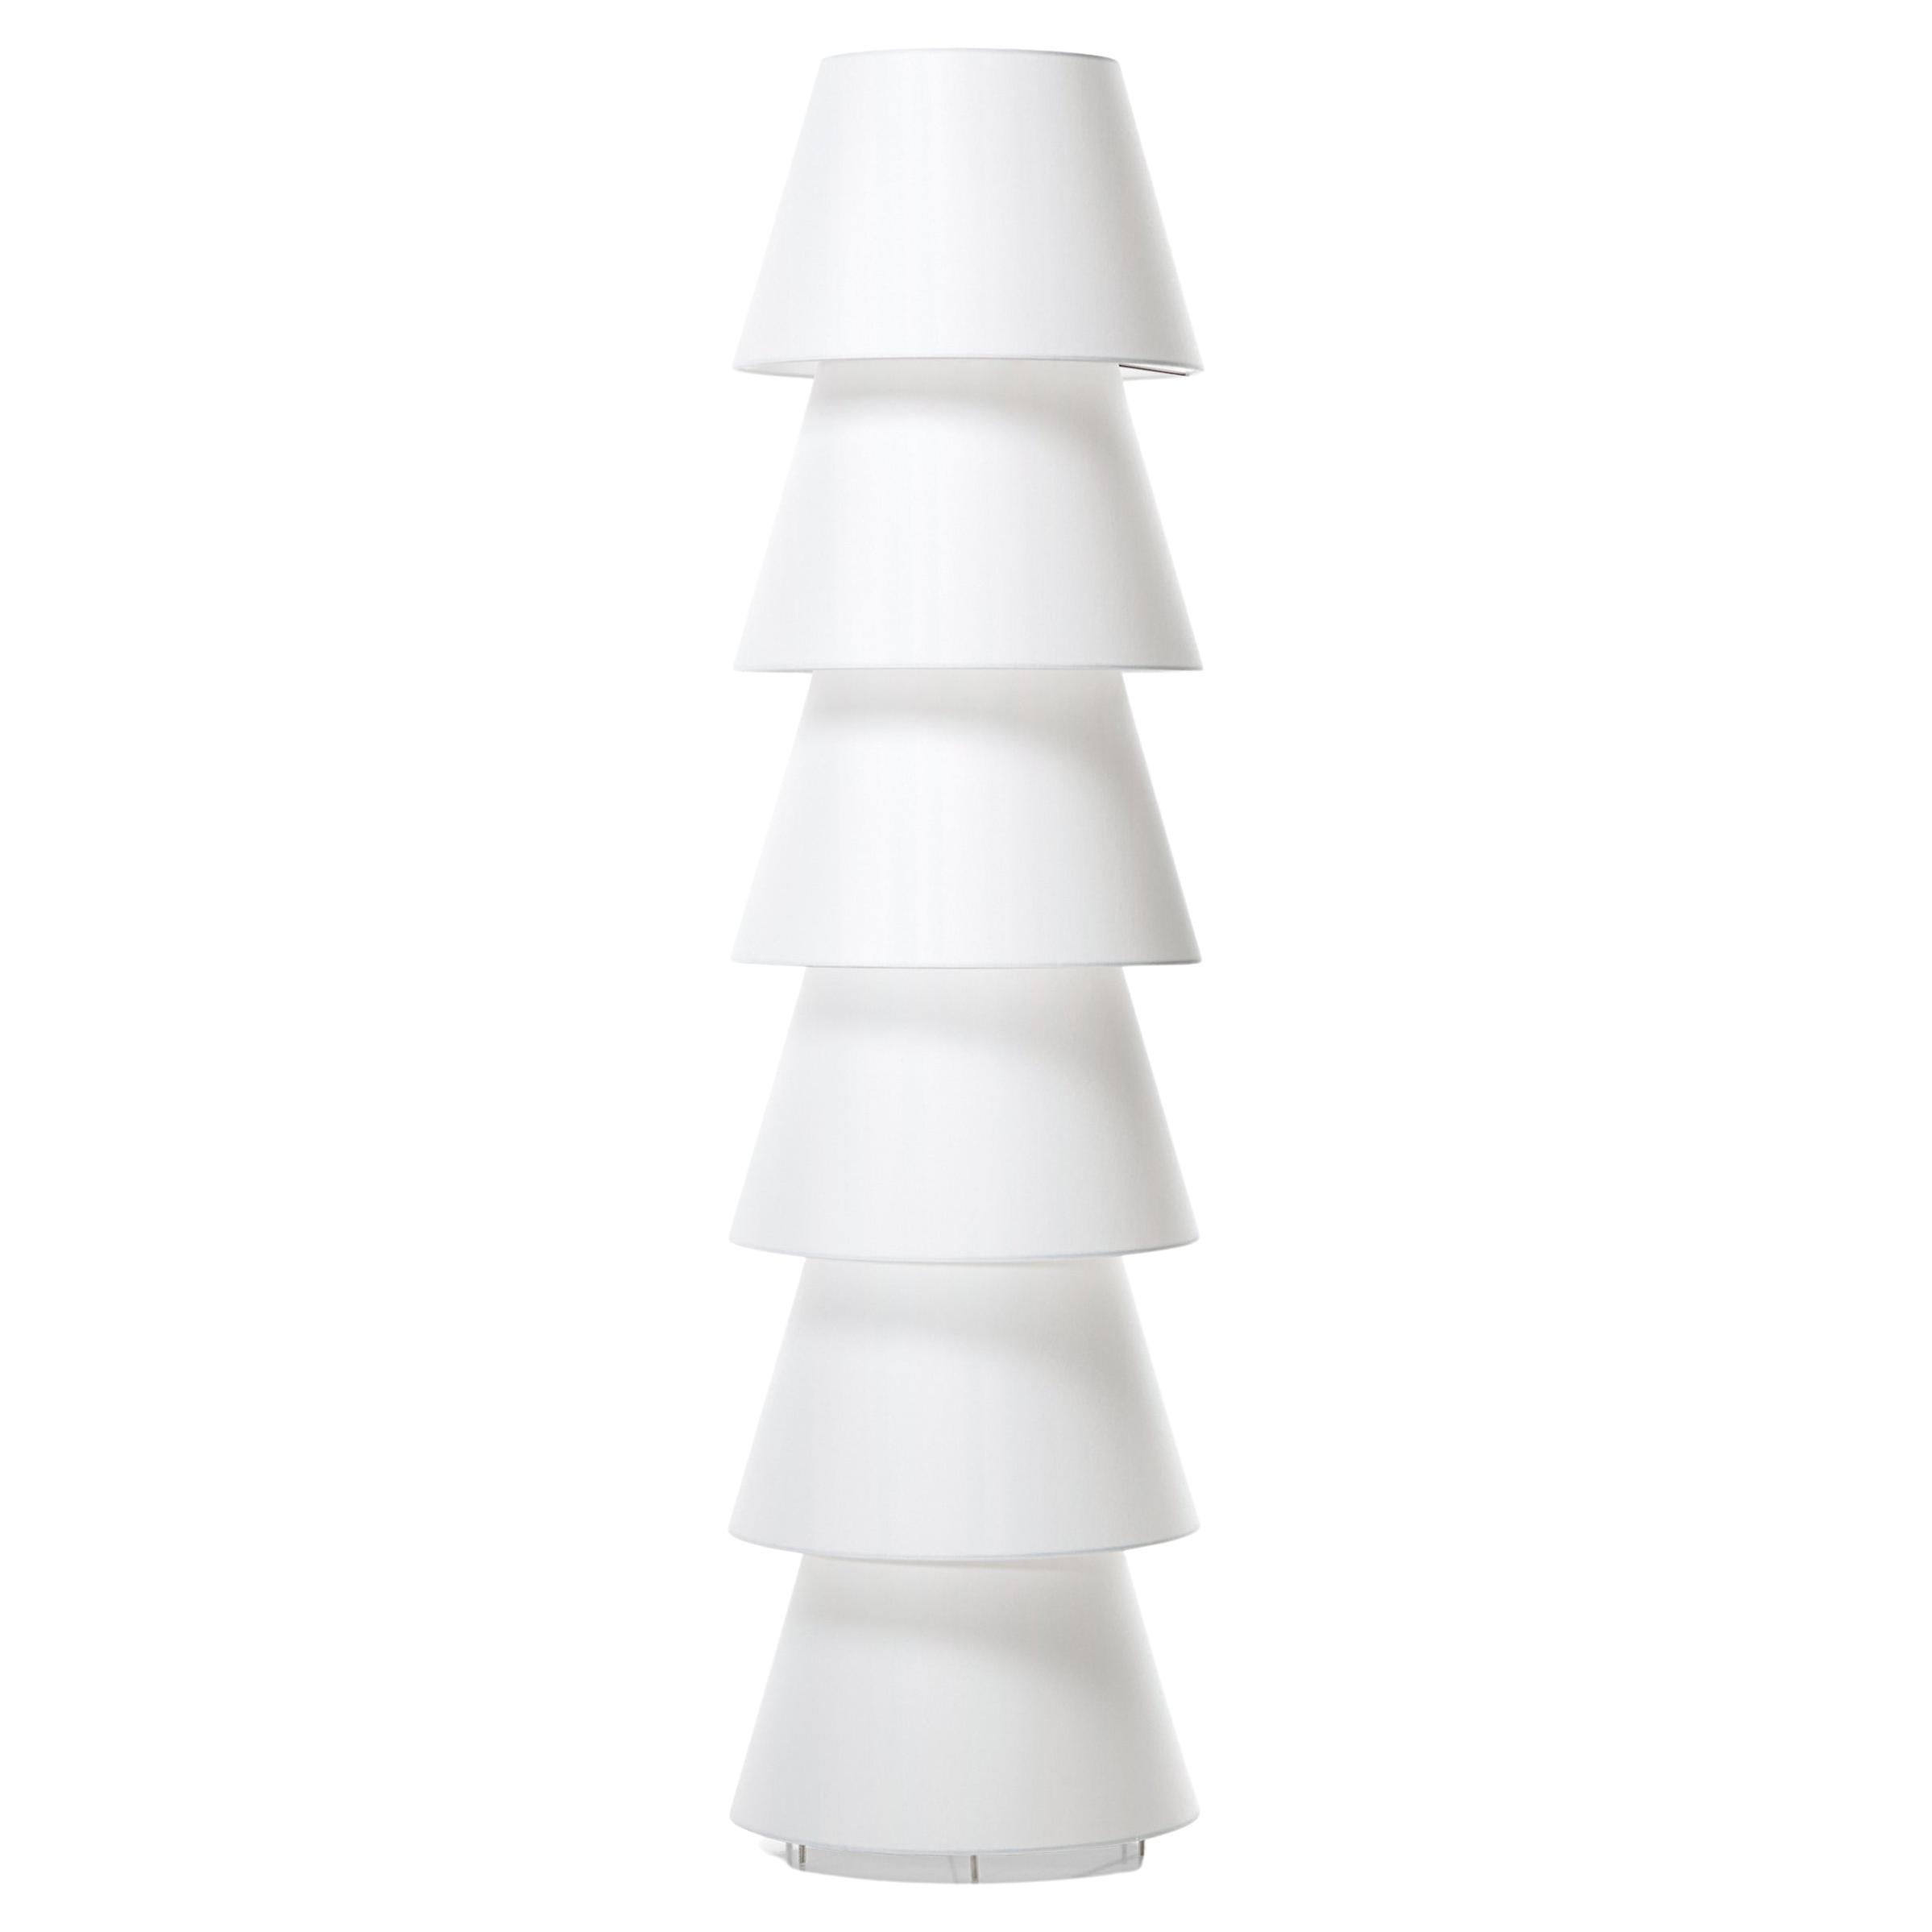 Moooi Set Up 6 Shades Floor Lamp in White PVC/Viscose Laminate on Metal Frame For Sale